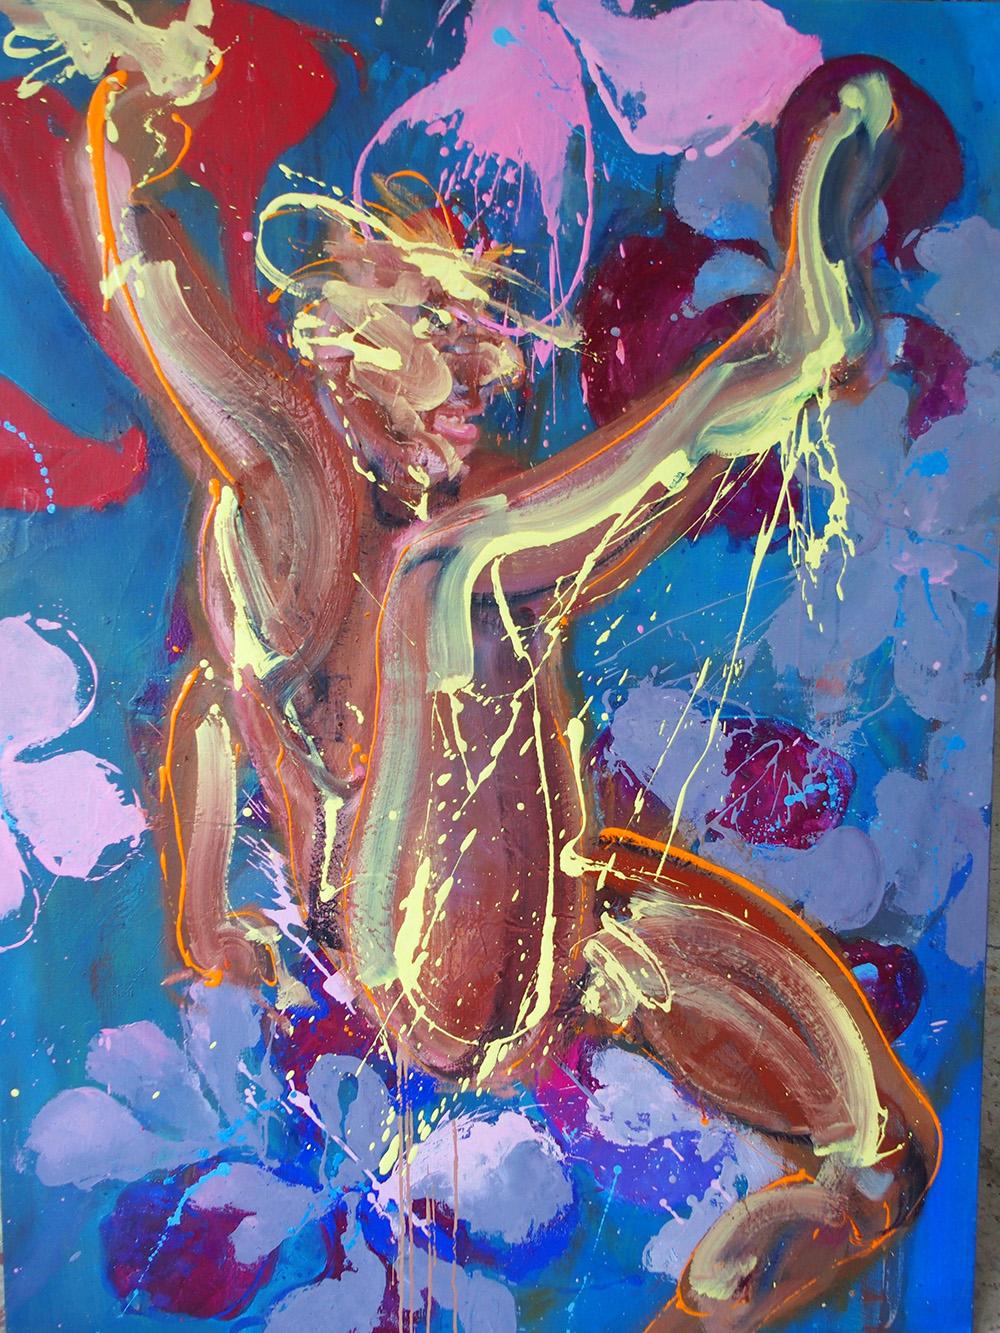 K is a unique oil on canvas painting by contemporary artist Christophe Dupety, dimensions are 146 × 114 cm (57.5 × 44.9 in).
The artwork is signed, sold unframed and comes with a certificate of authenticity.

Christophe Dupety's "Human Figures"